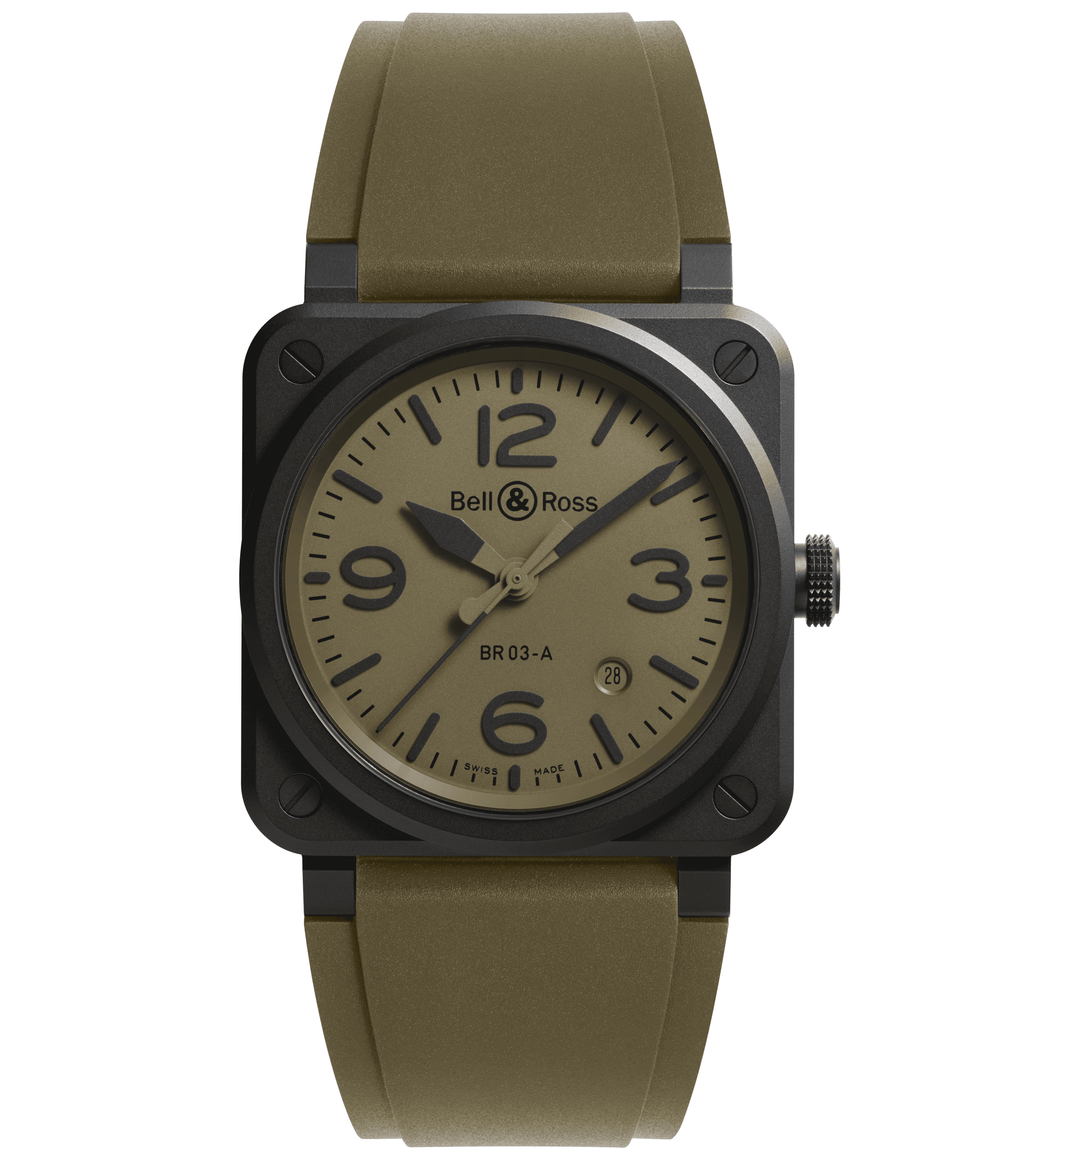 NEW BR 03 MILITARY CERAMIC - Bell & Ross - Montre - Les Champs d'Or